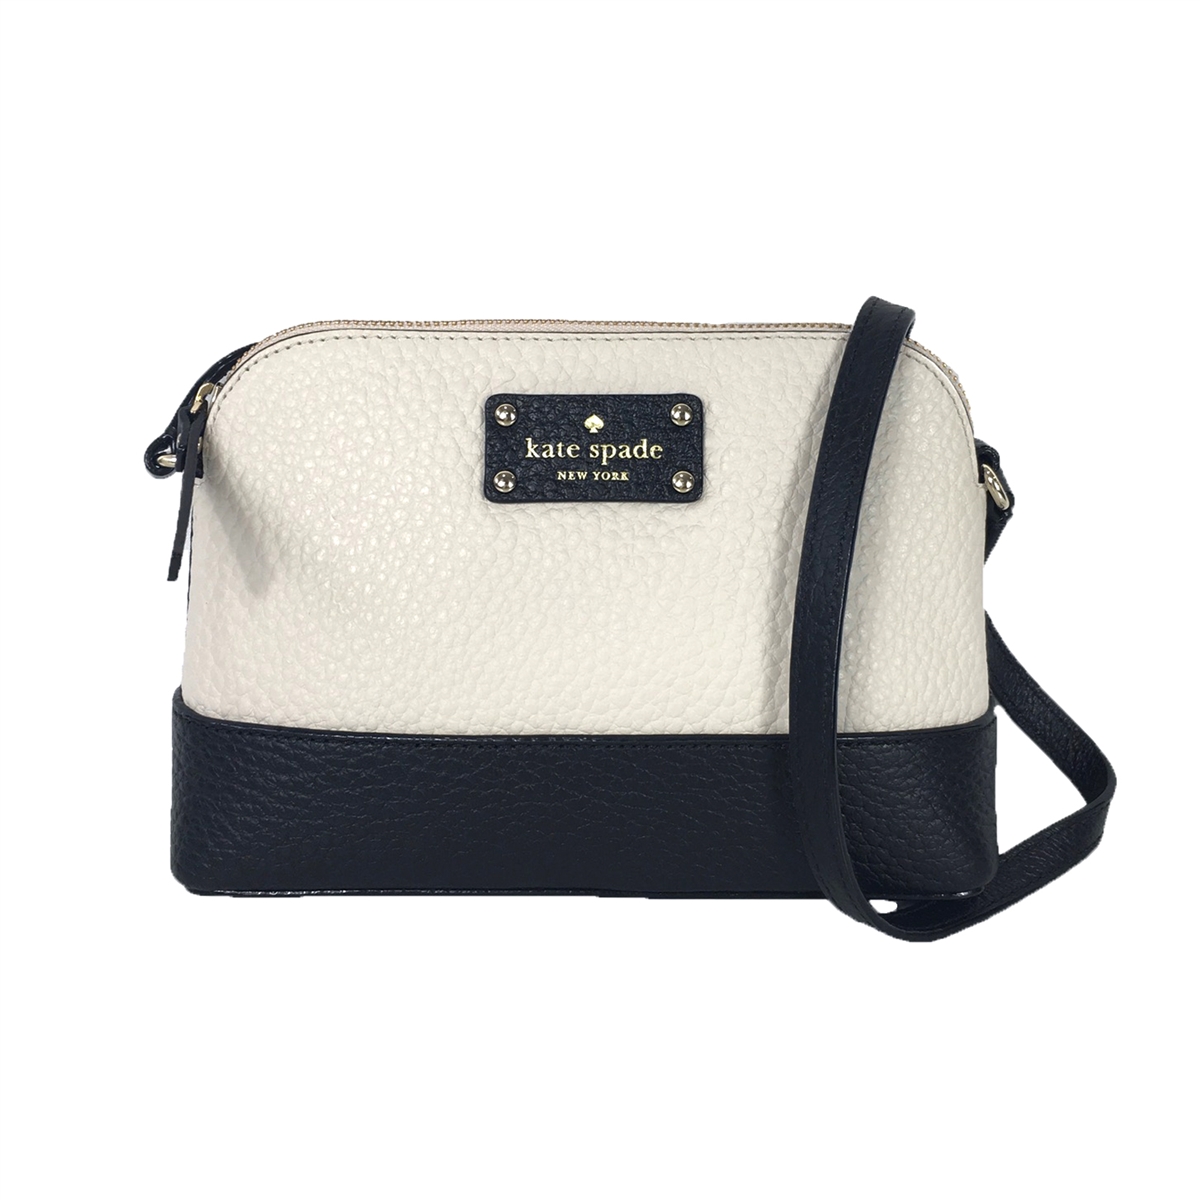 KATE SPADE #28029 White and Black Leather Crossbody